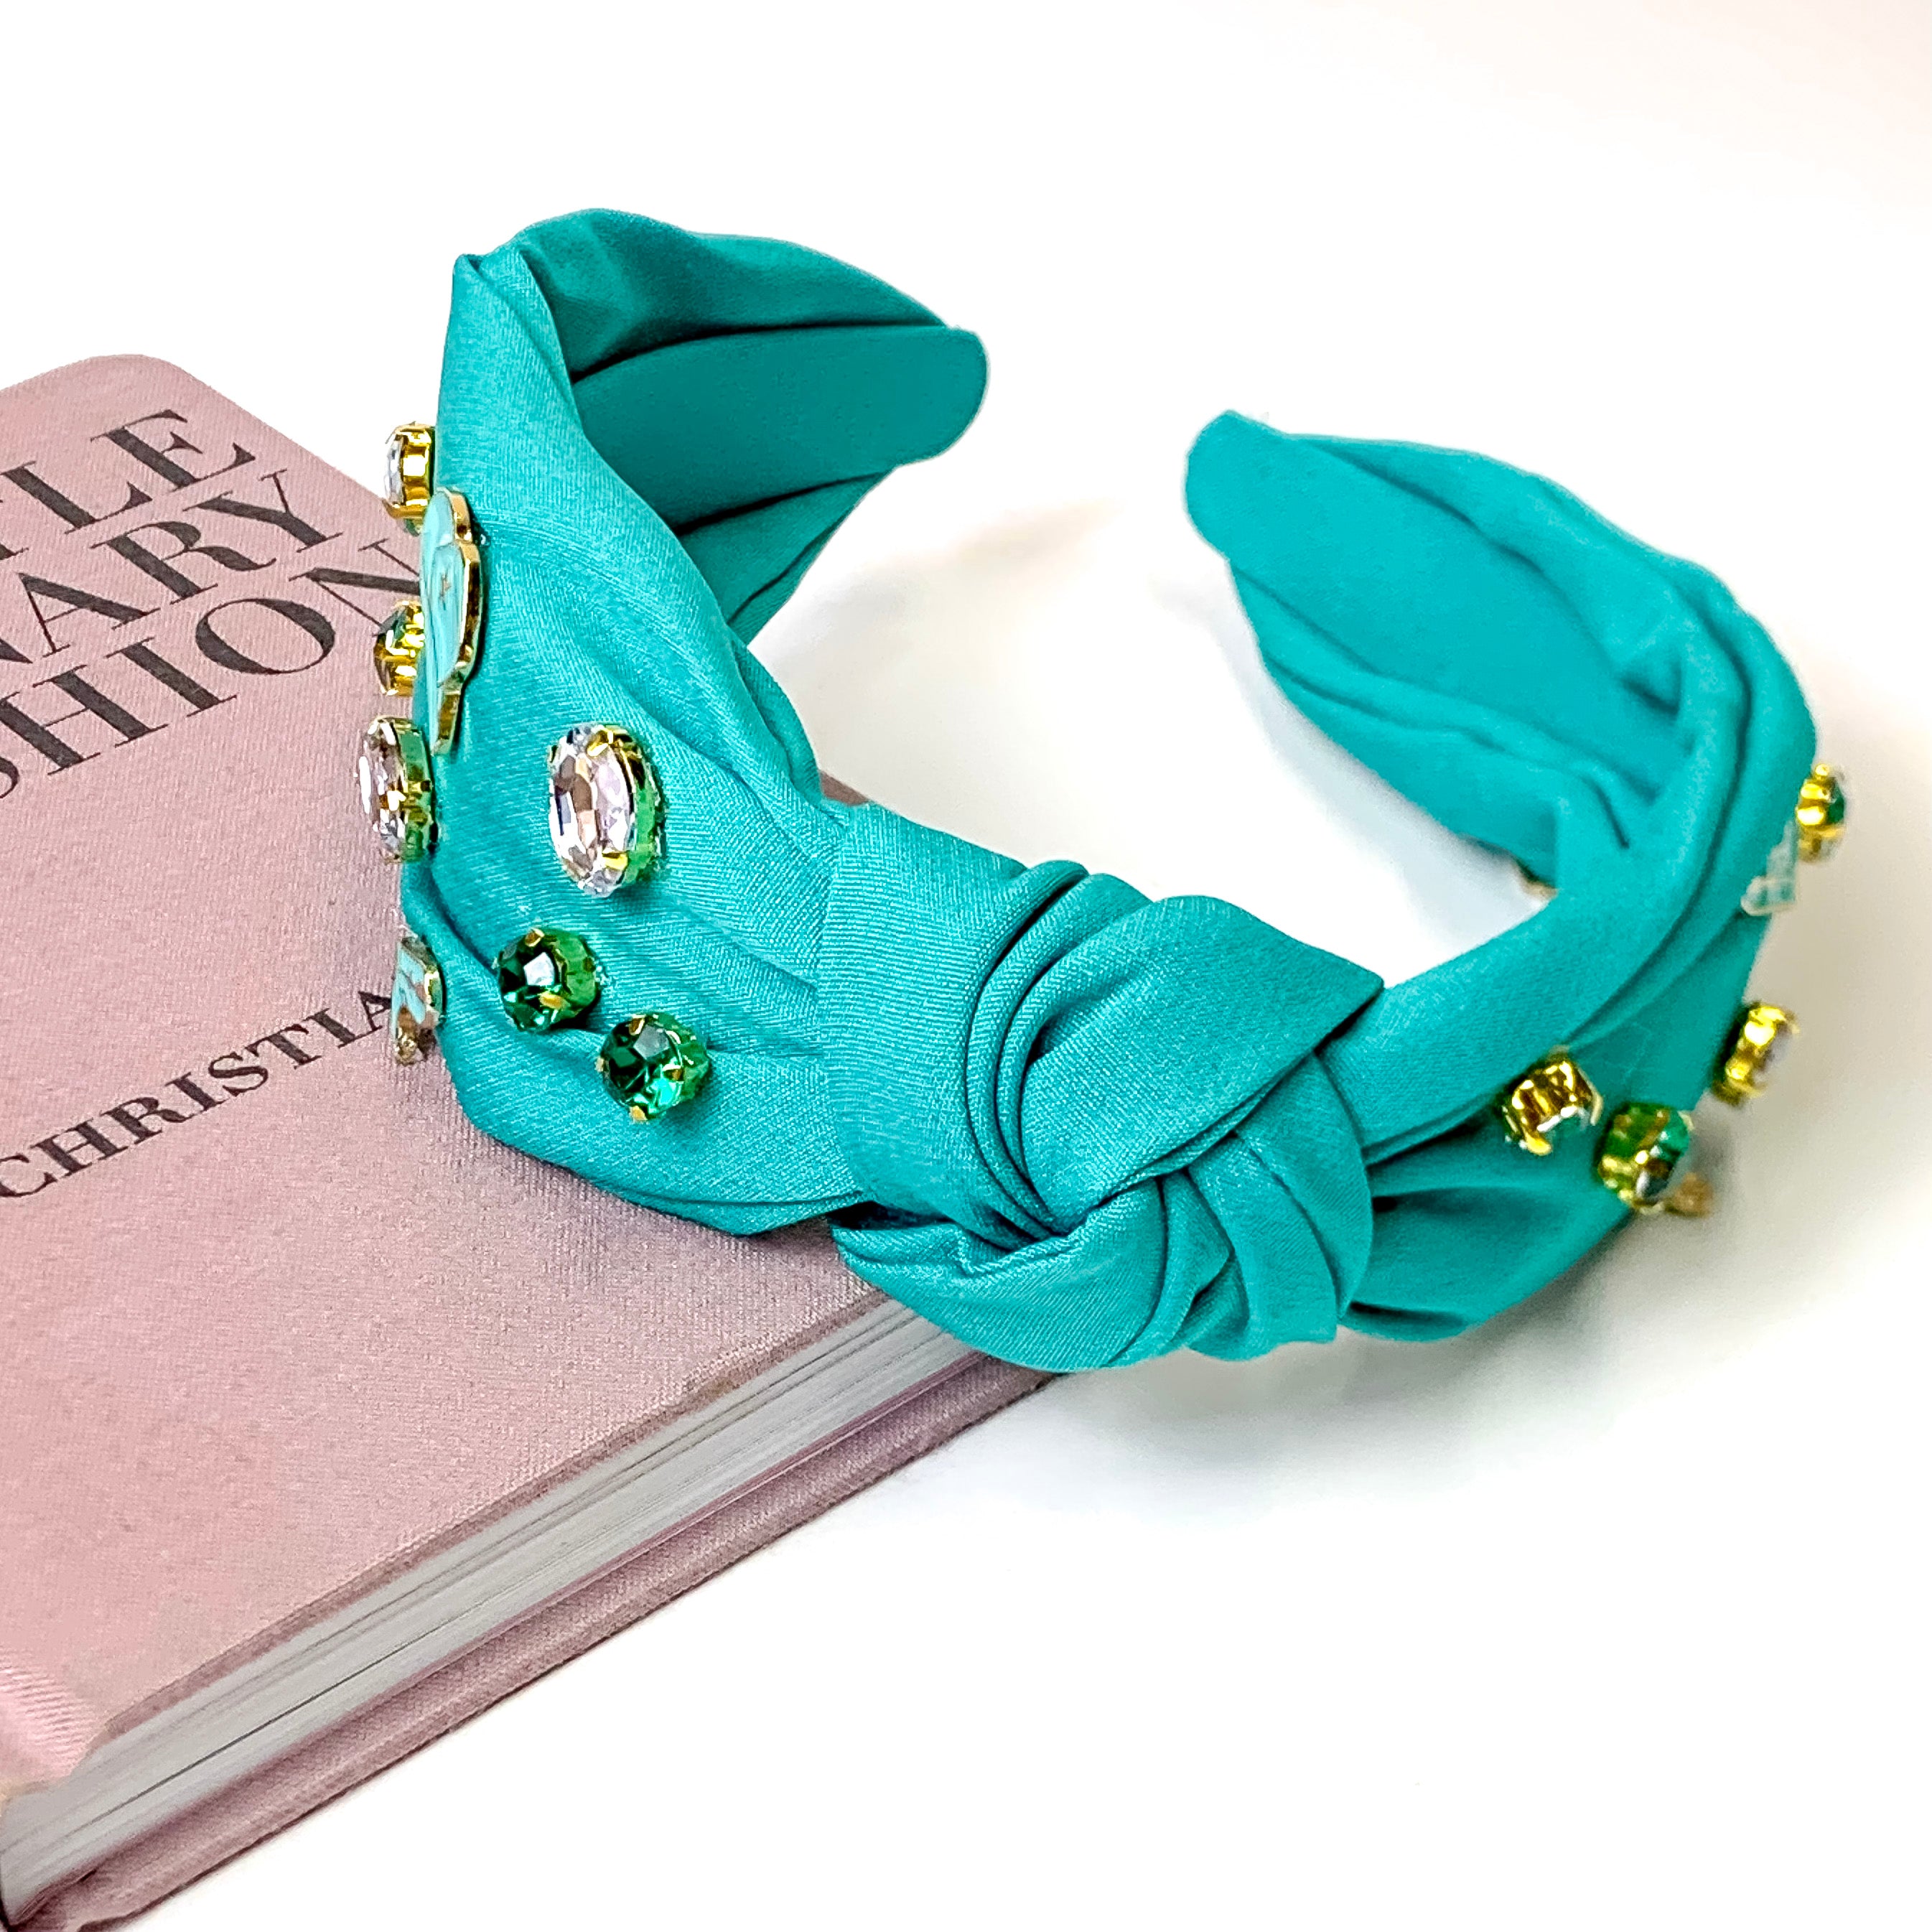 Teal Cowboy Hat and Boot Knotted Headband with Crystal Detailing - Giddy Up Glamour Boutique